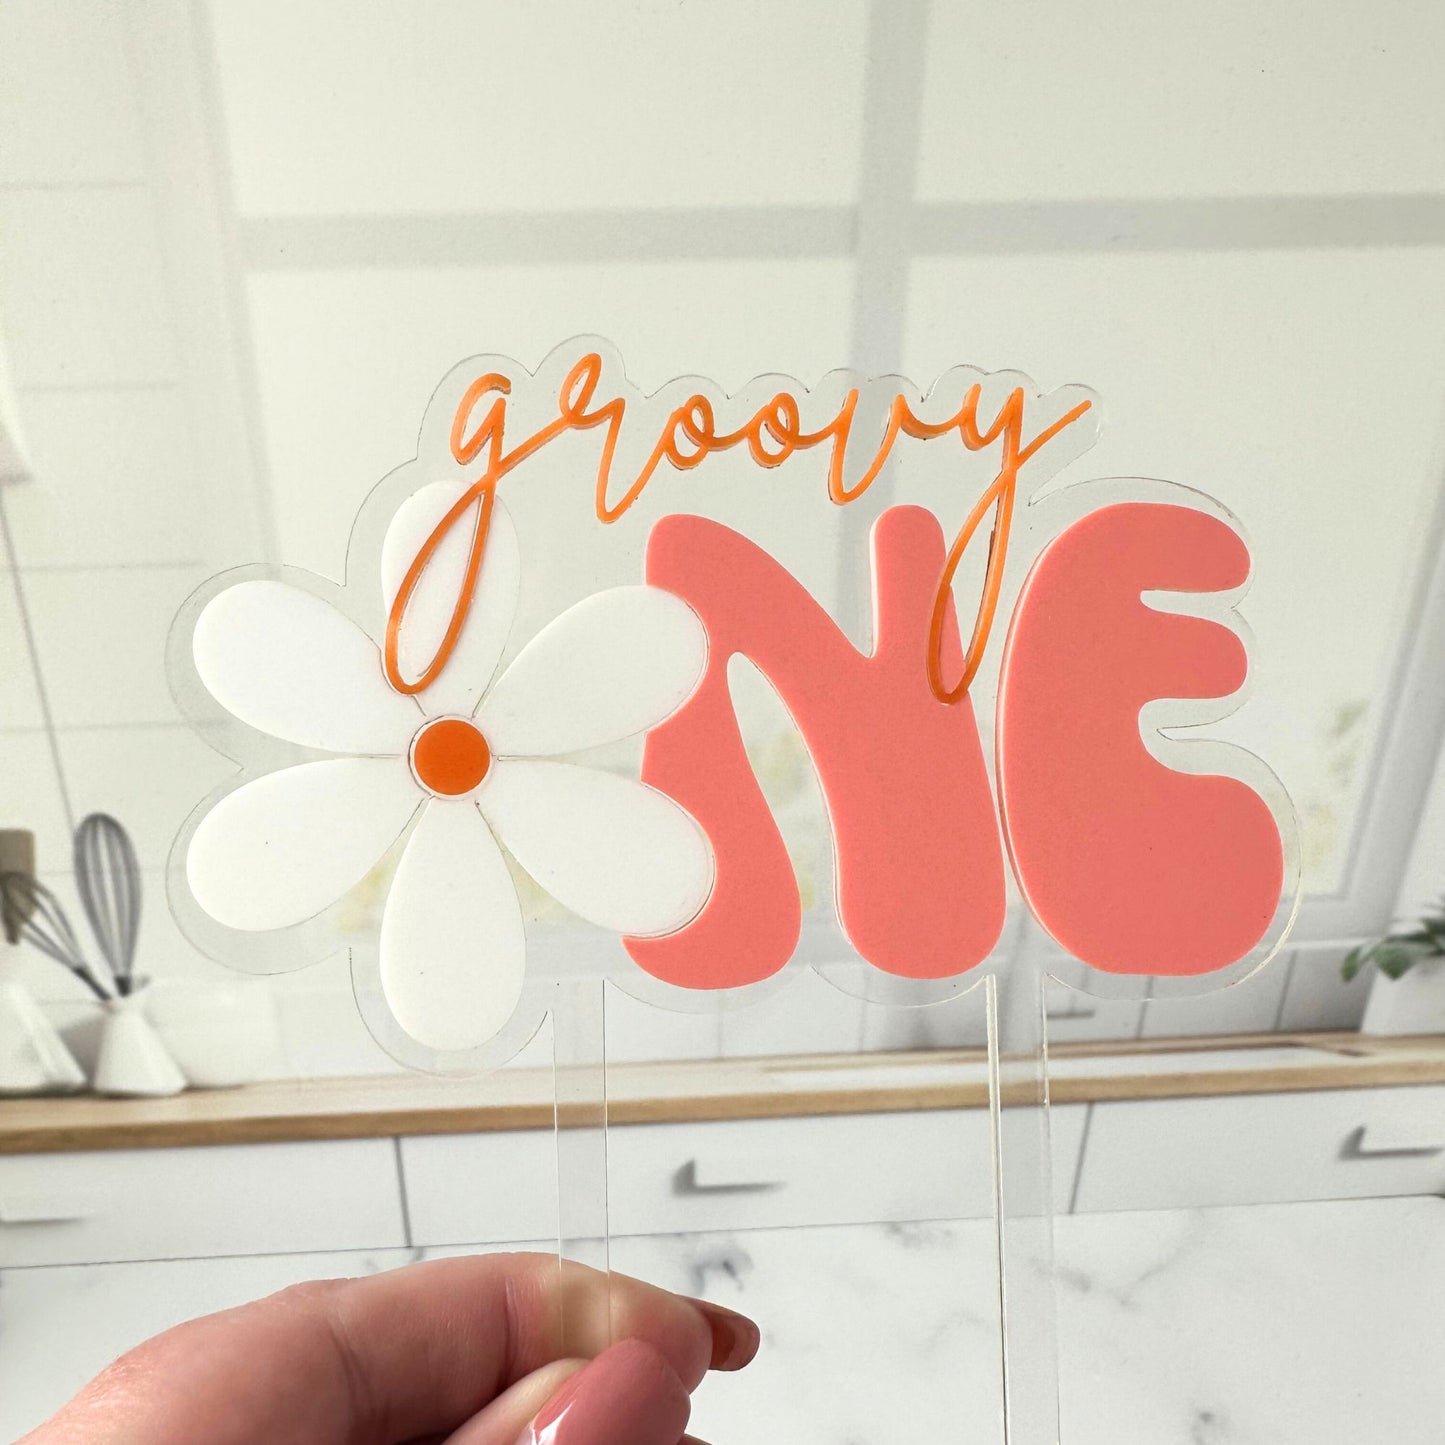 Groovy One Cake Topper